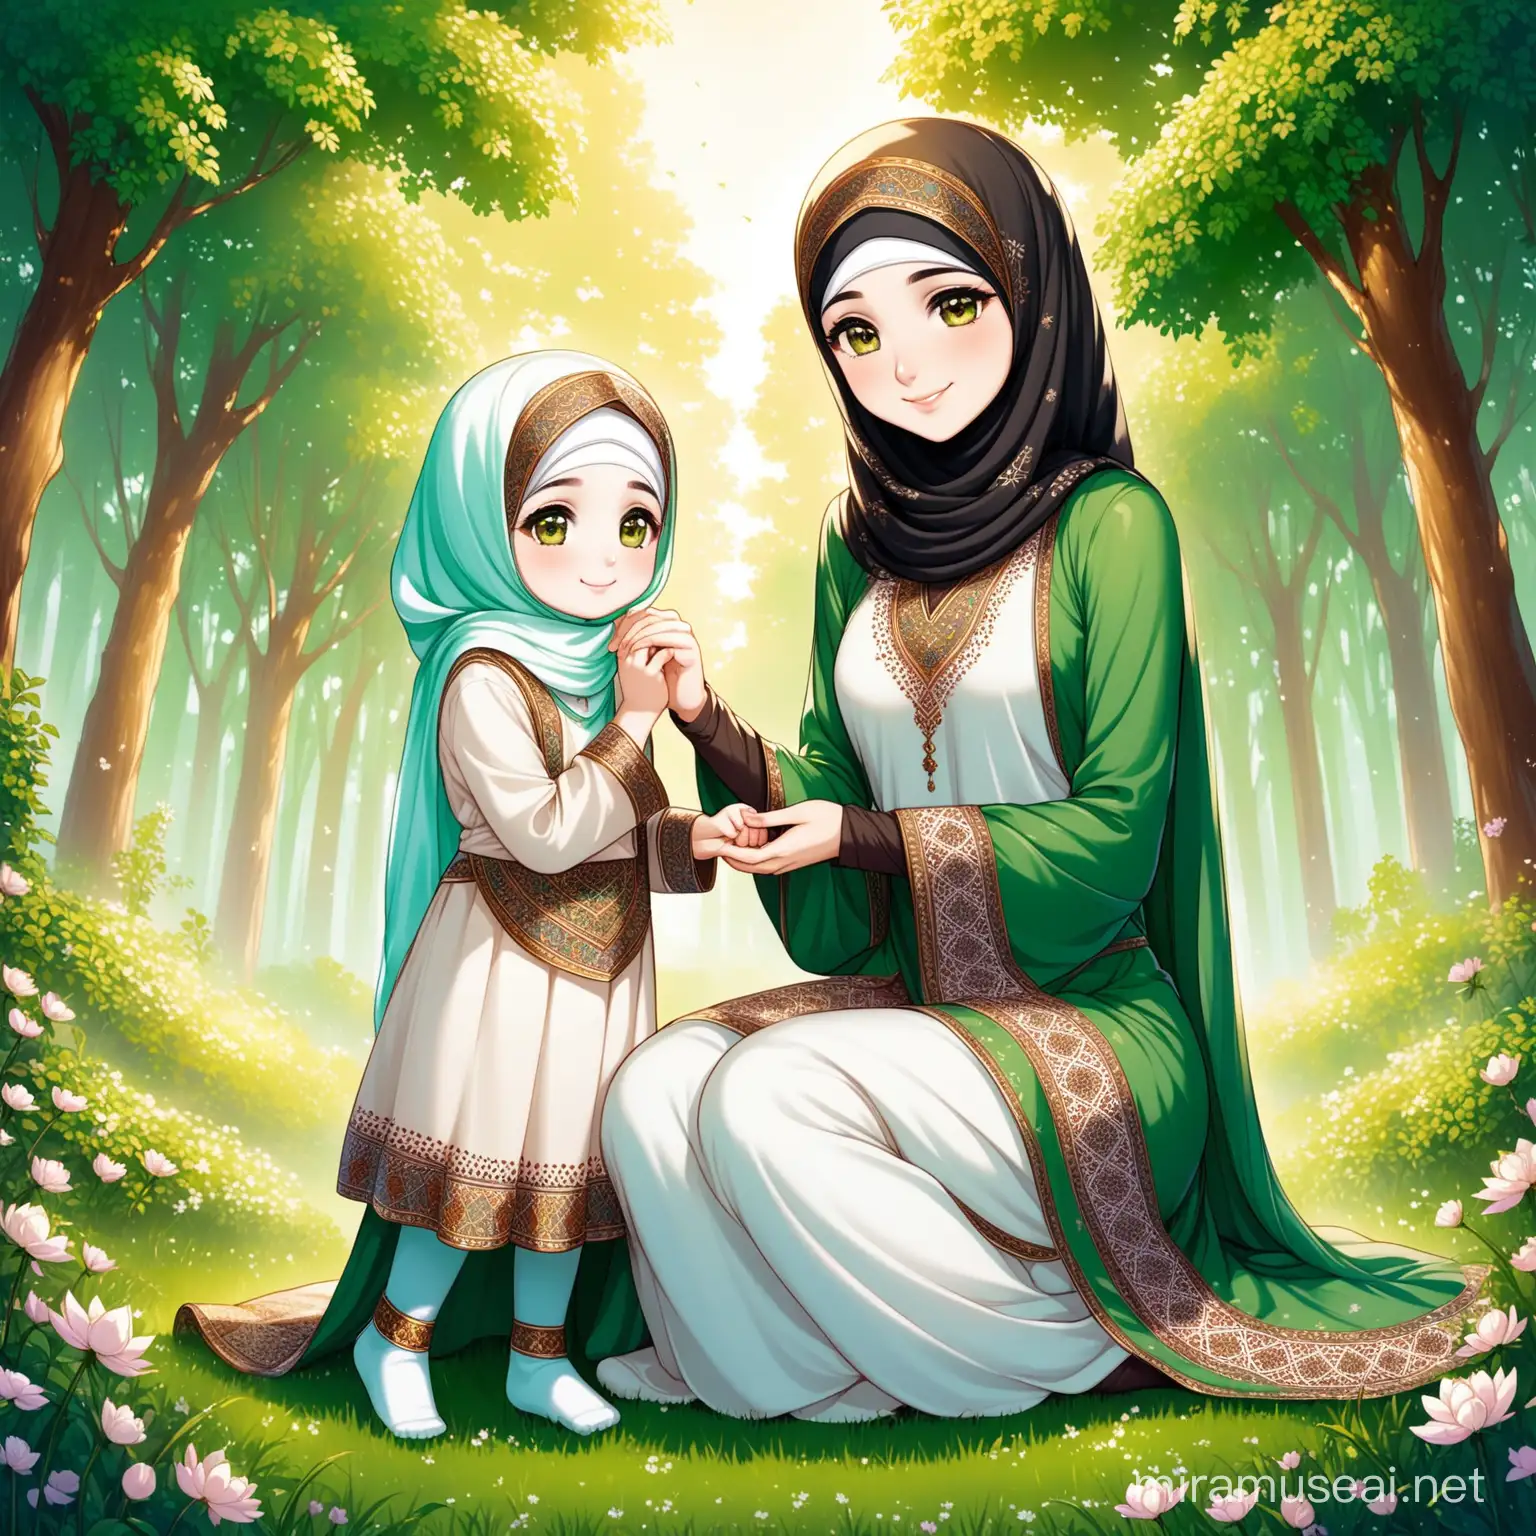 Character Persian girl(full height, Muslim, with emphasis no hair out of veil(Hijab), smaller eyes, bigger nose, white skin, cute, smiling, wearing socks, clothes full of Persian designs) named Fatemeh. Fatemeh is sitting kissing the hand of her mother politely, smooth clothes.

Atmosphere forest, grass flowers, etc...